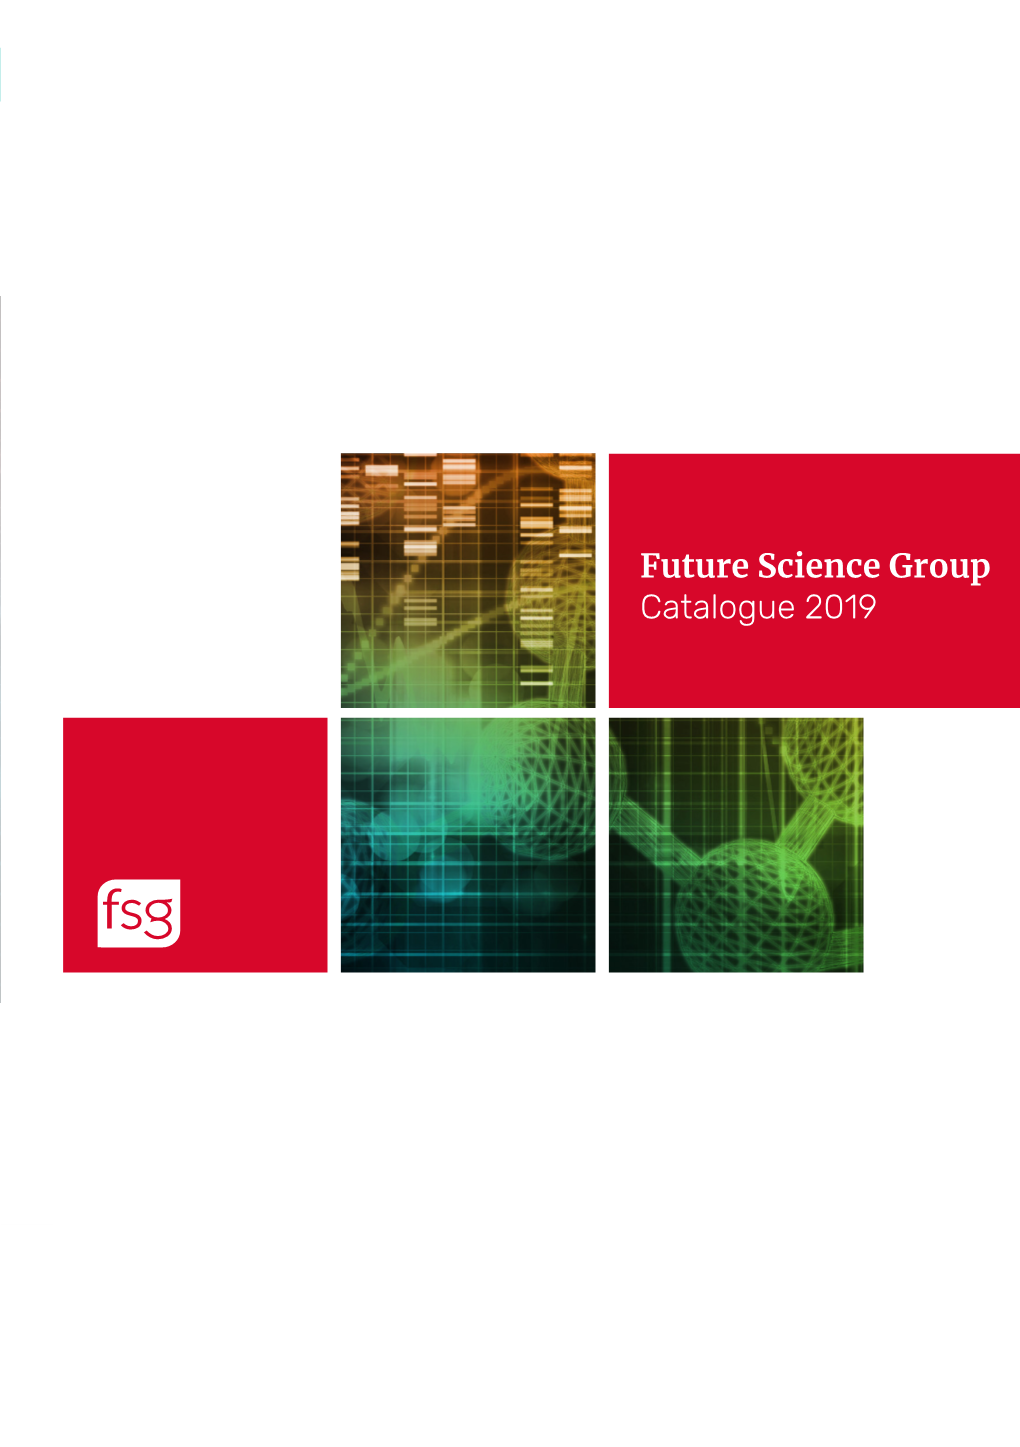 Future Science Group Catalogue 2019